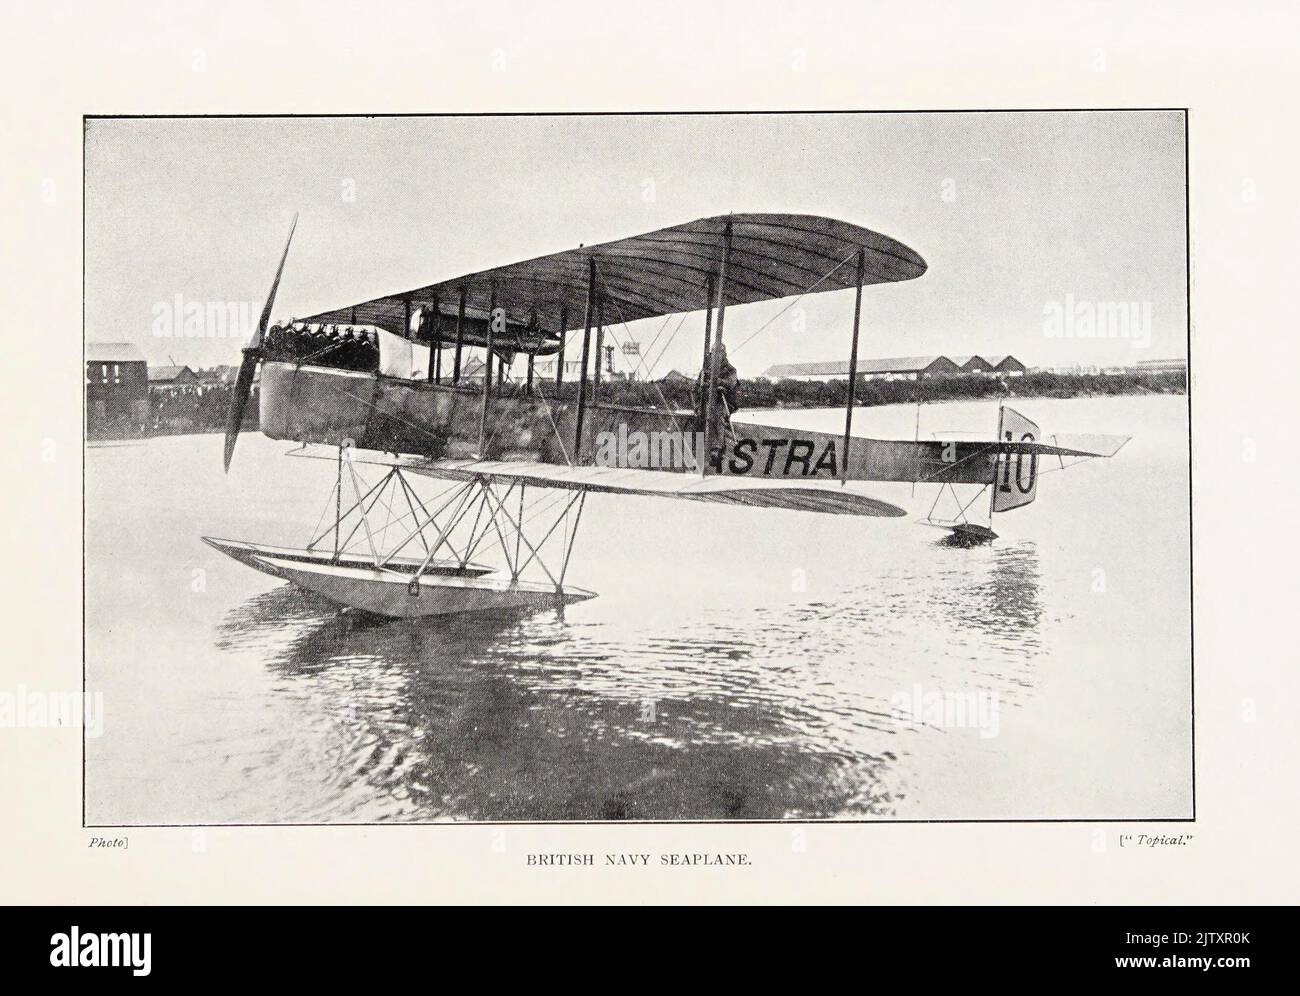 BRITISH NAVY SEAPLANE from the book ' The British battle fleet : its inception and growth throughout the centuries to the present day ' Volume 2 by Jane, Fred T., 1865-1916 Publication date 1915 Stock Photo